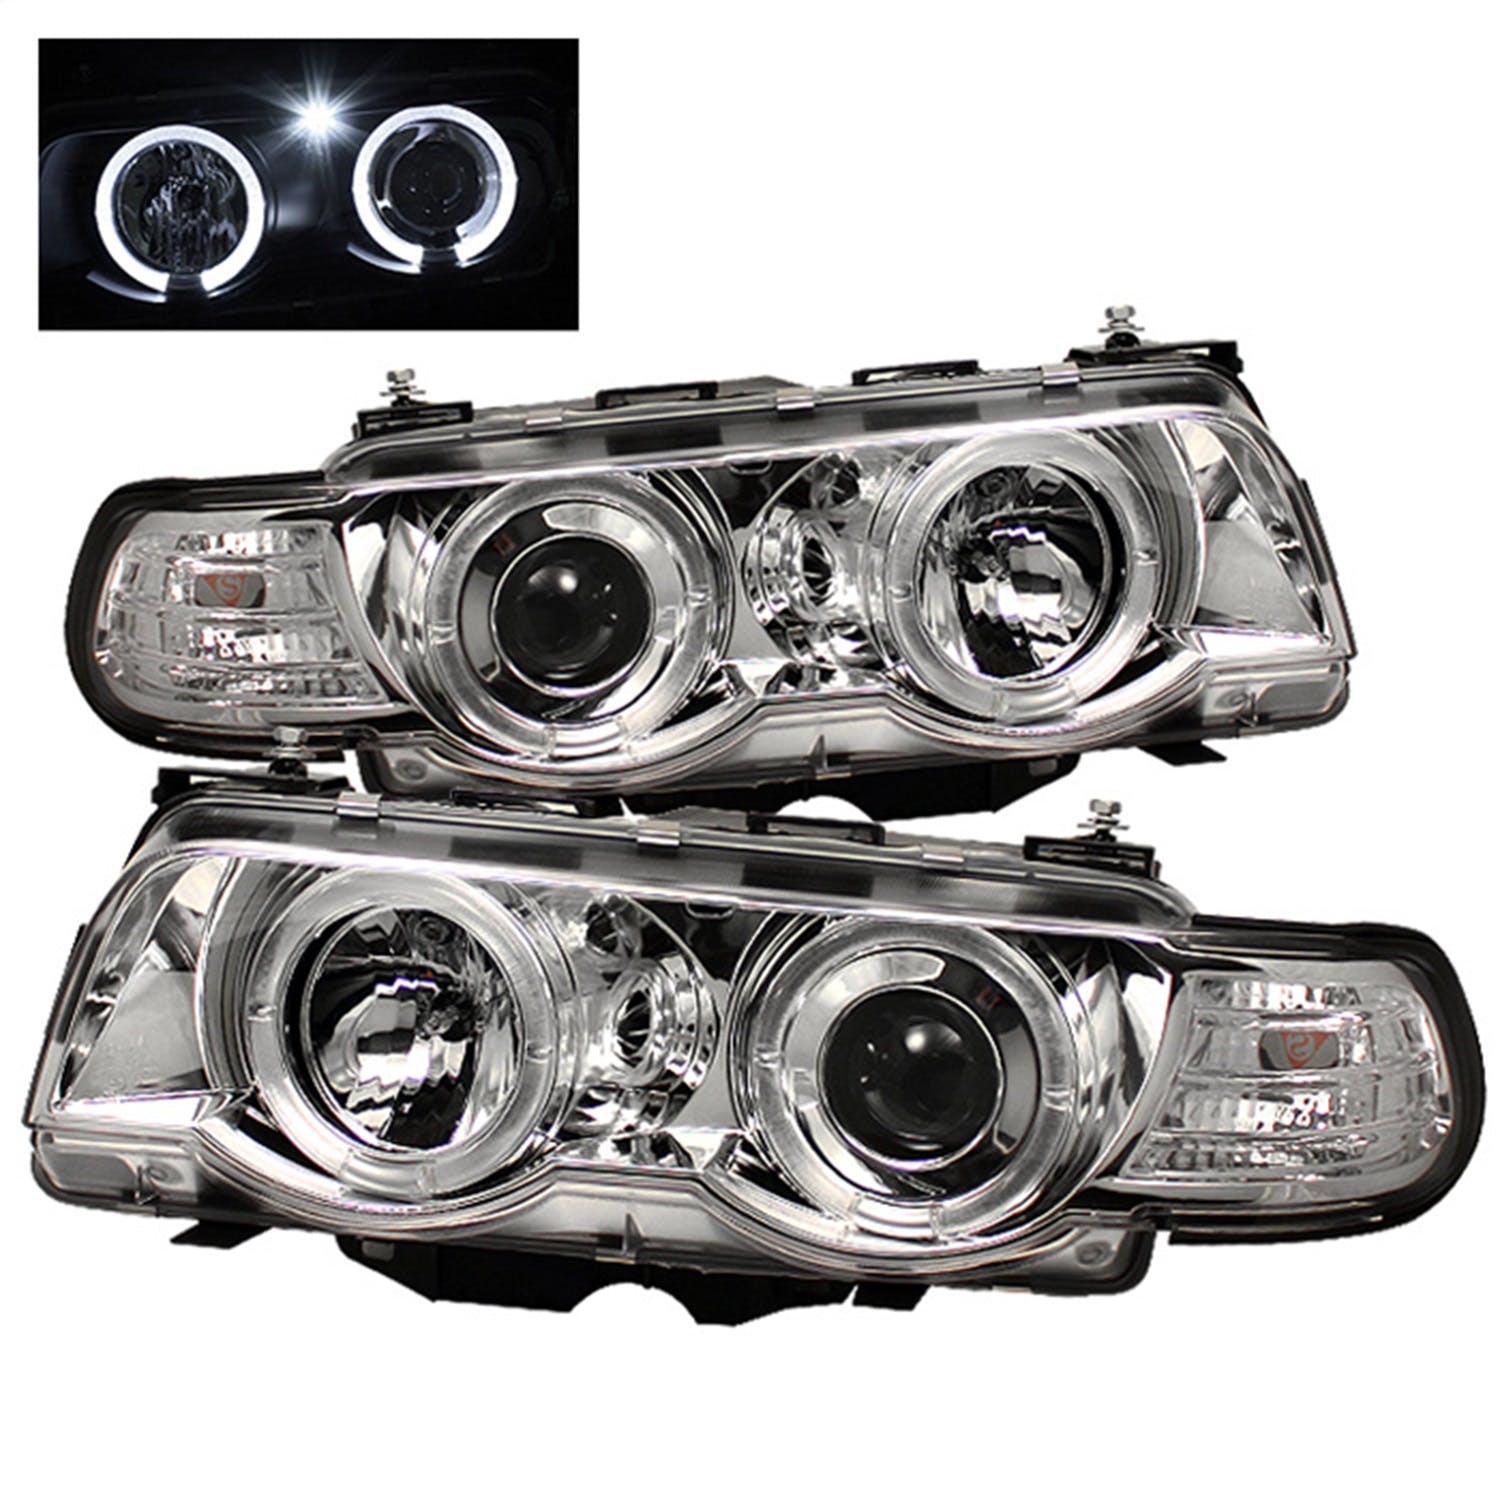 Spyder Auto 5008879 (Spyder) BMW E38 7-Series 99-01 Projector Headlights 1PC-Xenon/HID Model Only (